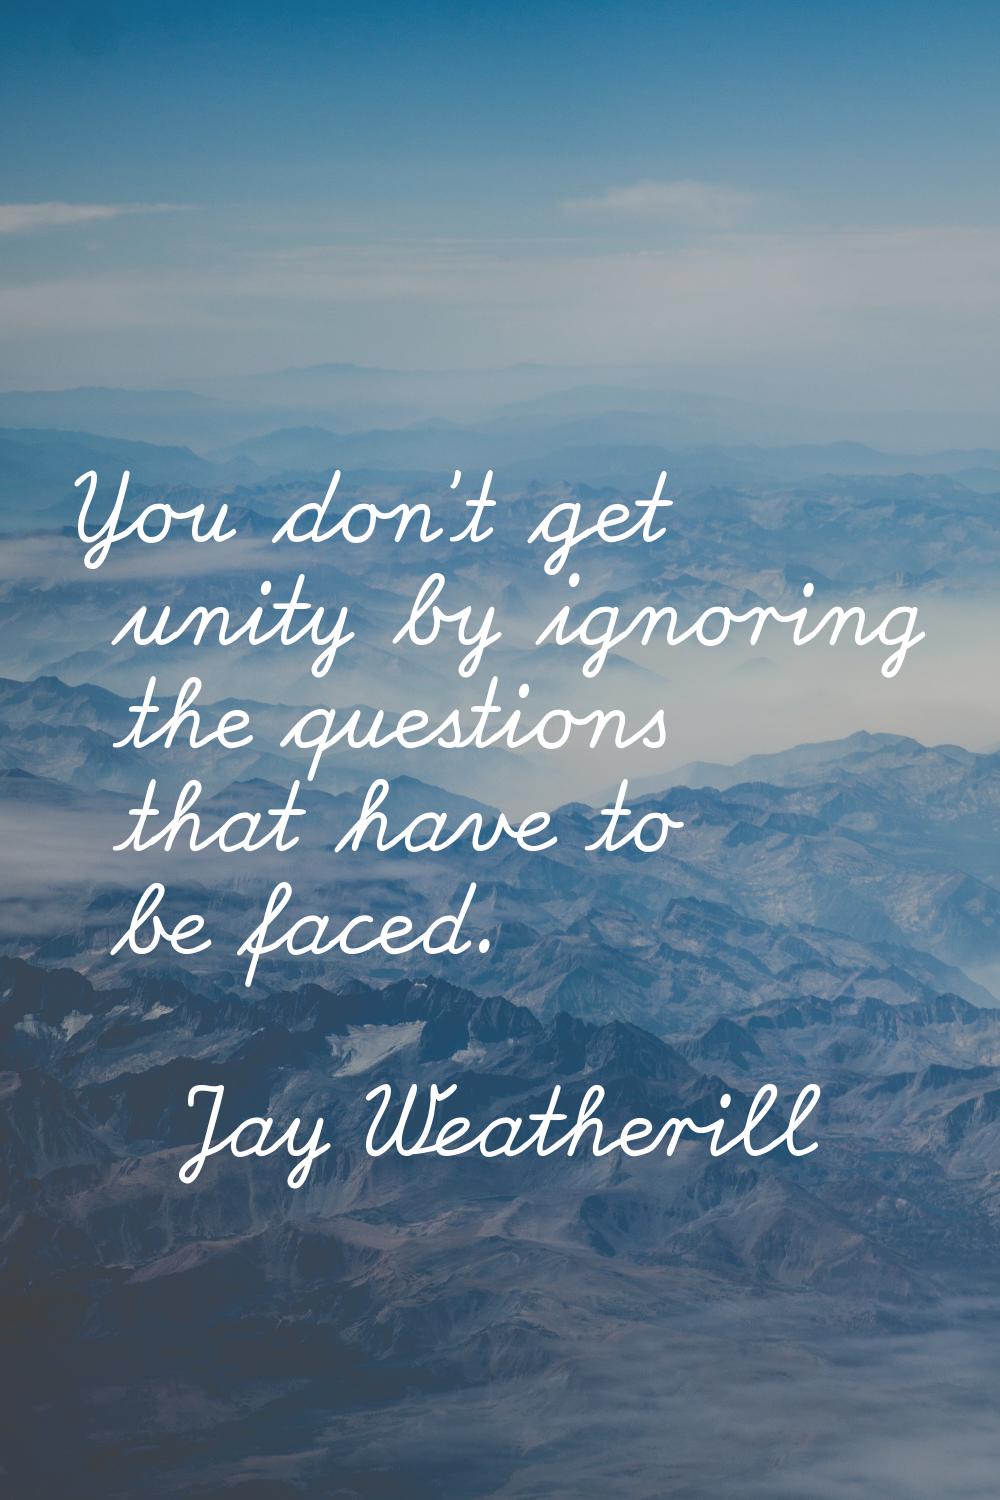 You don't get unity by ignoring the questions that have to be faced.